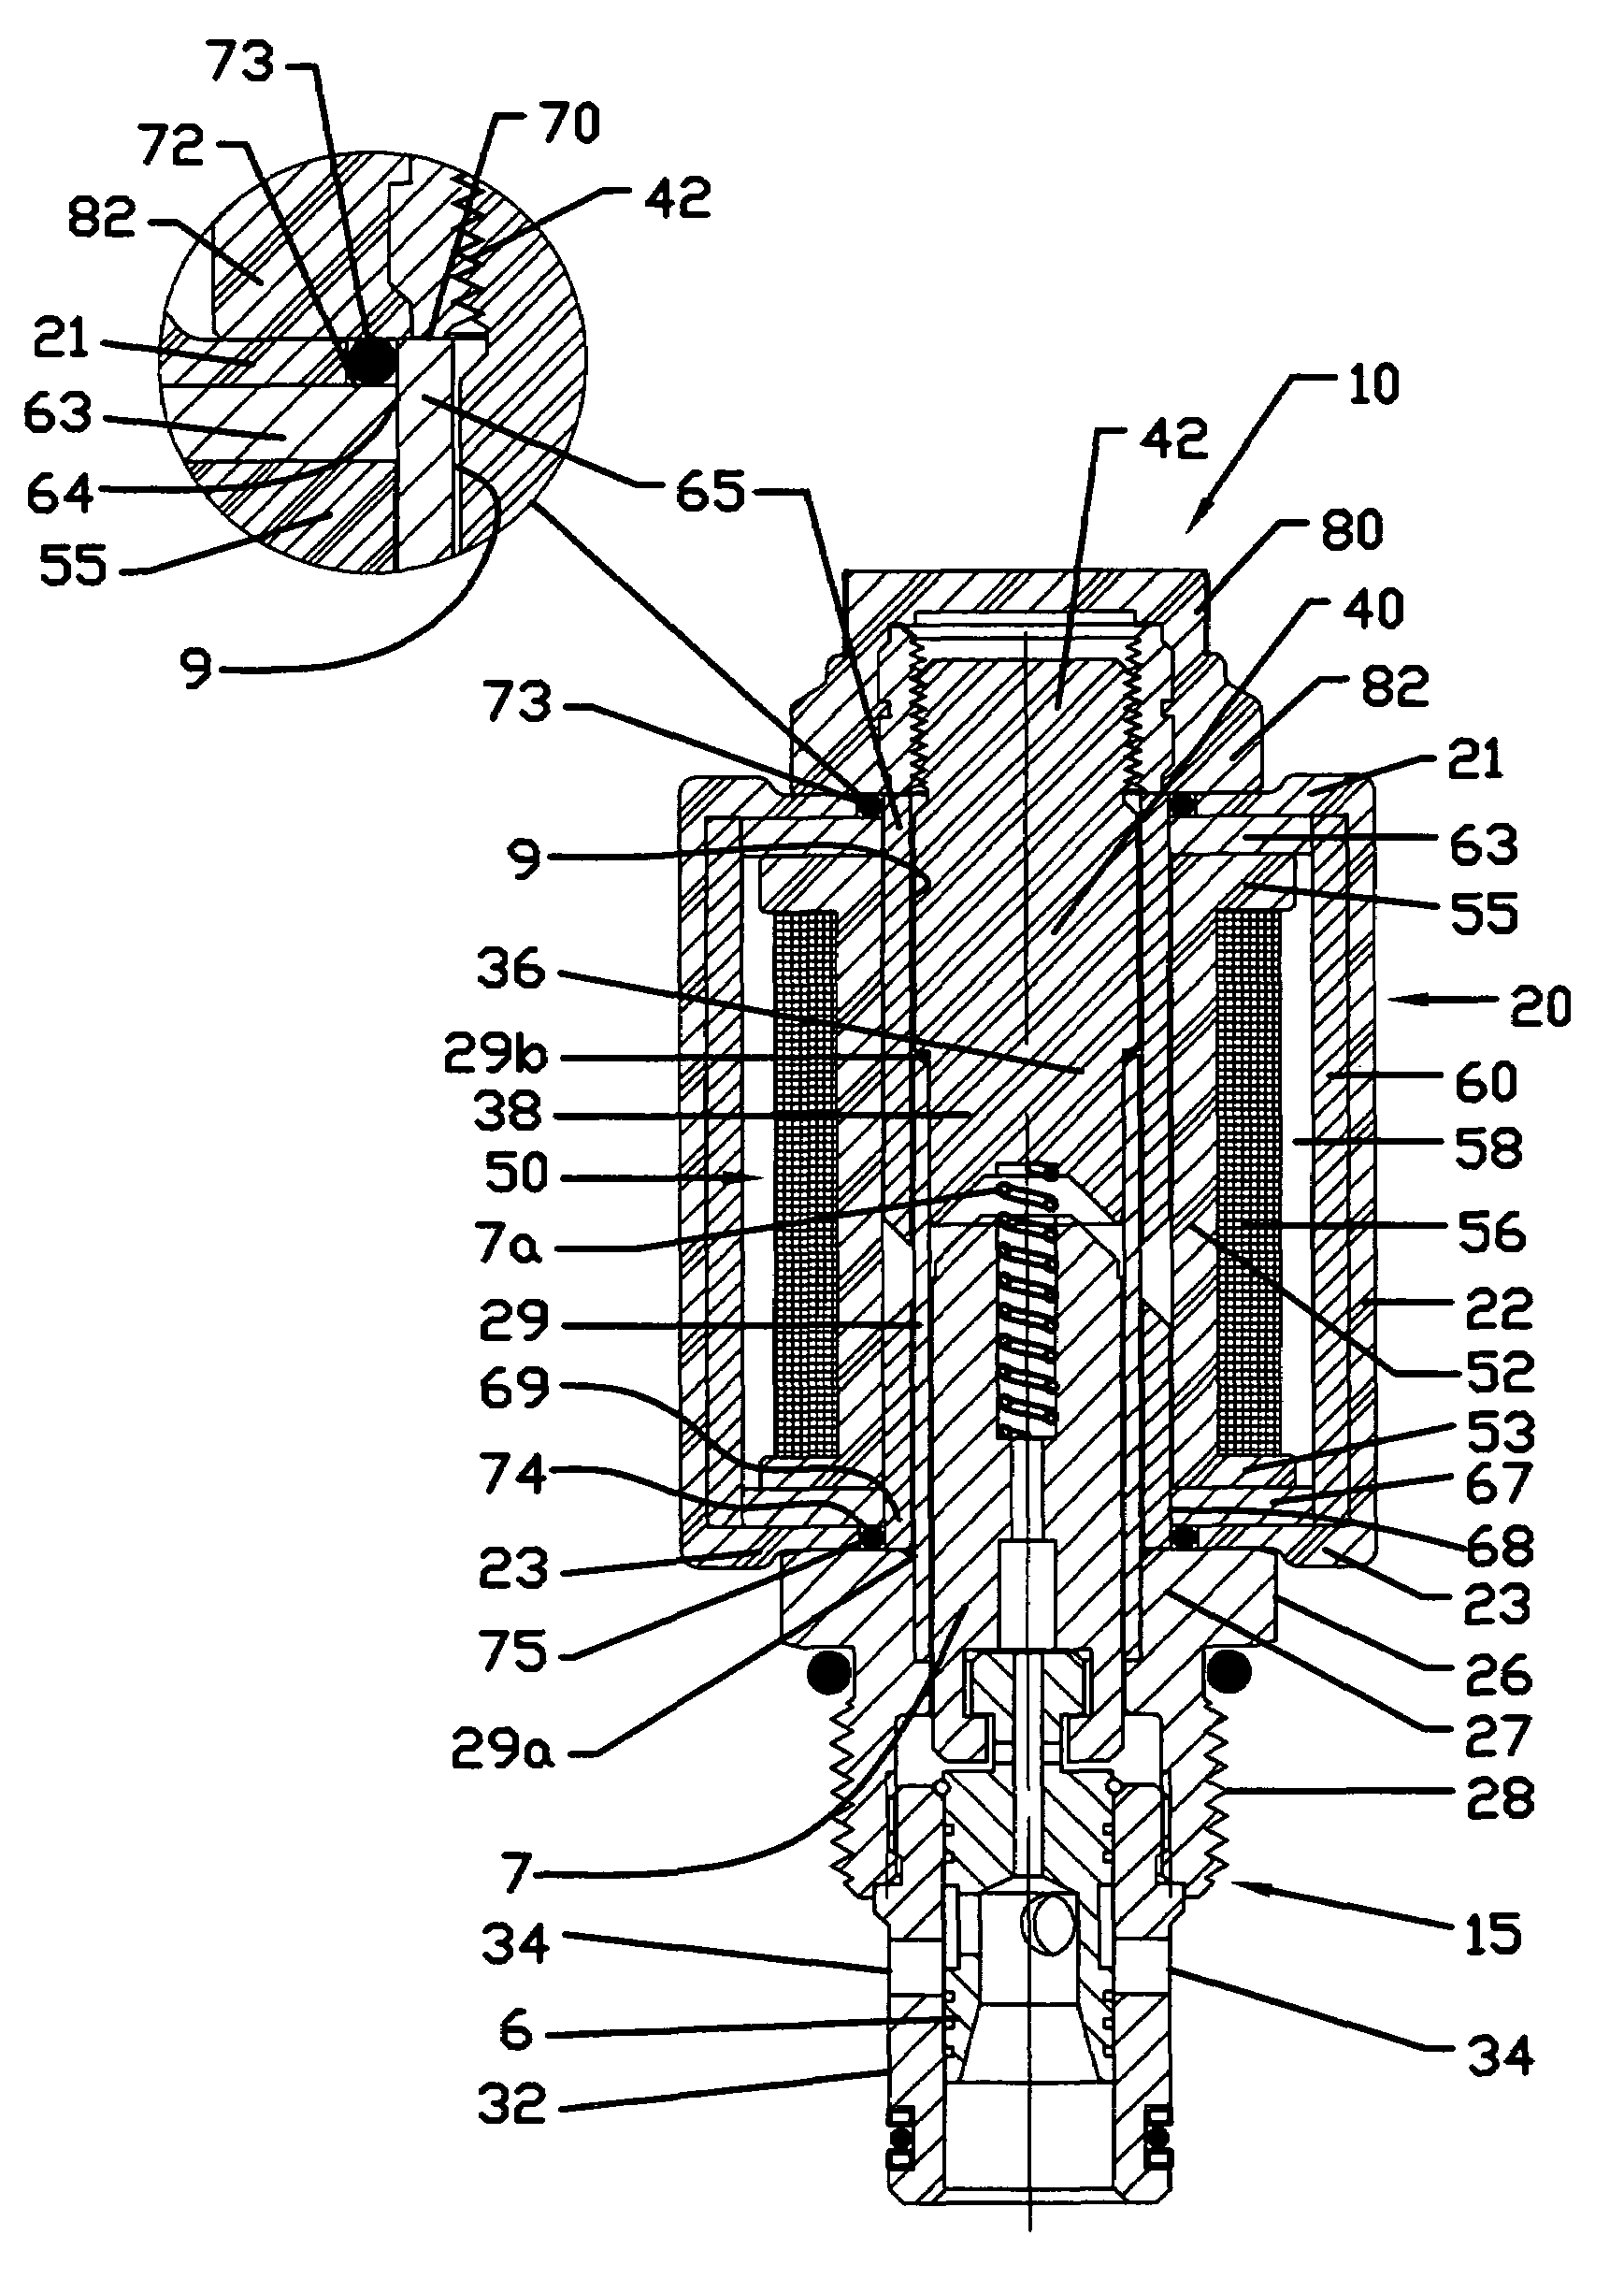 Harsh environment coil-actuator for a cartridge type valve